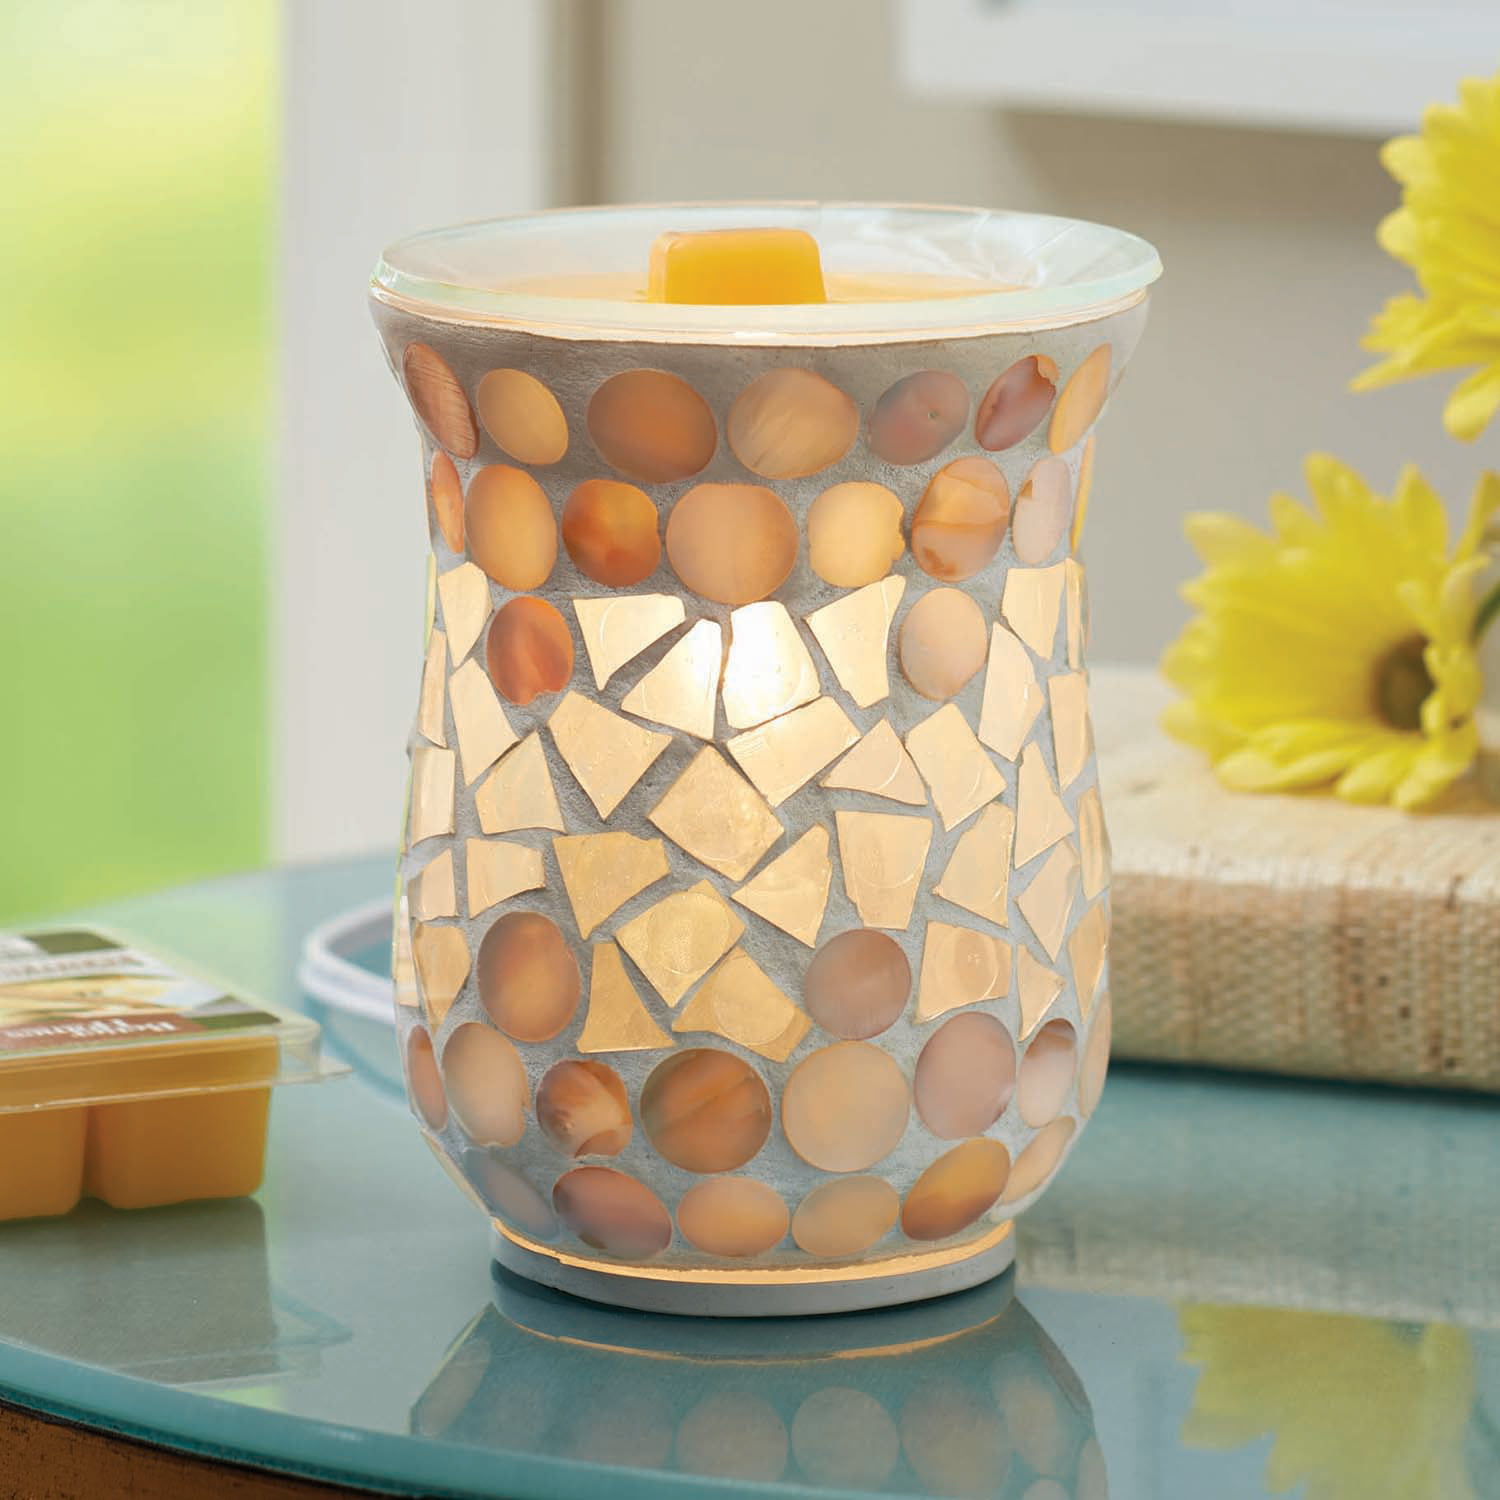 WHOLE HOUSEWARES Mosaic Glass Fragrance and Candle Warmer